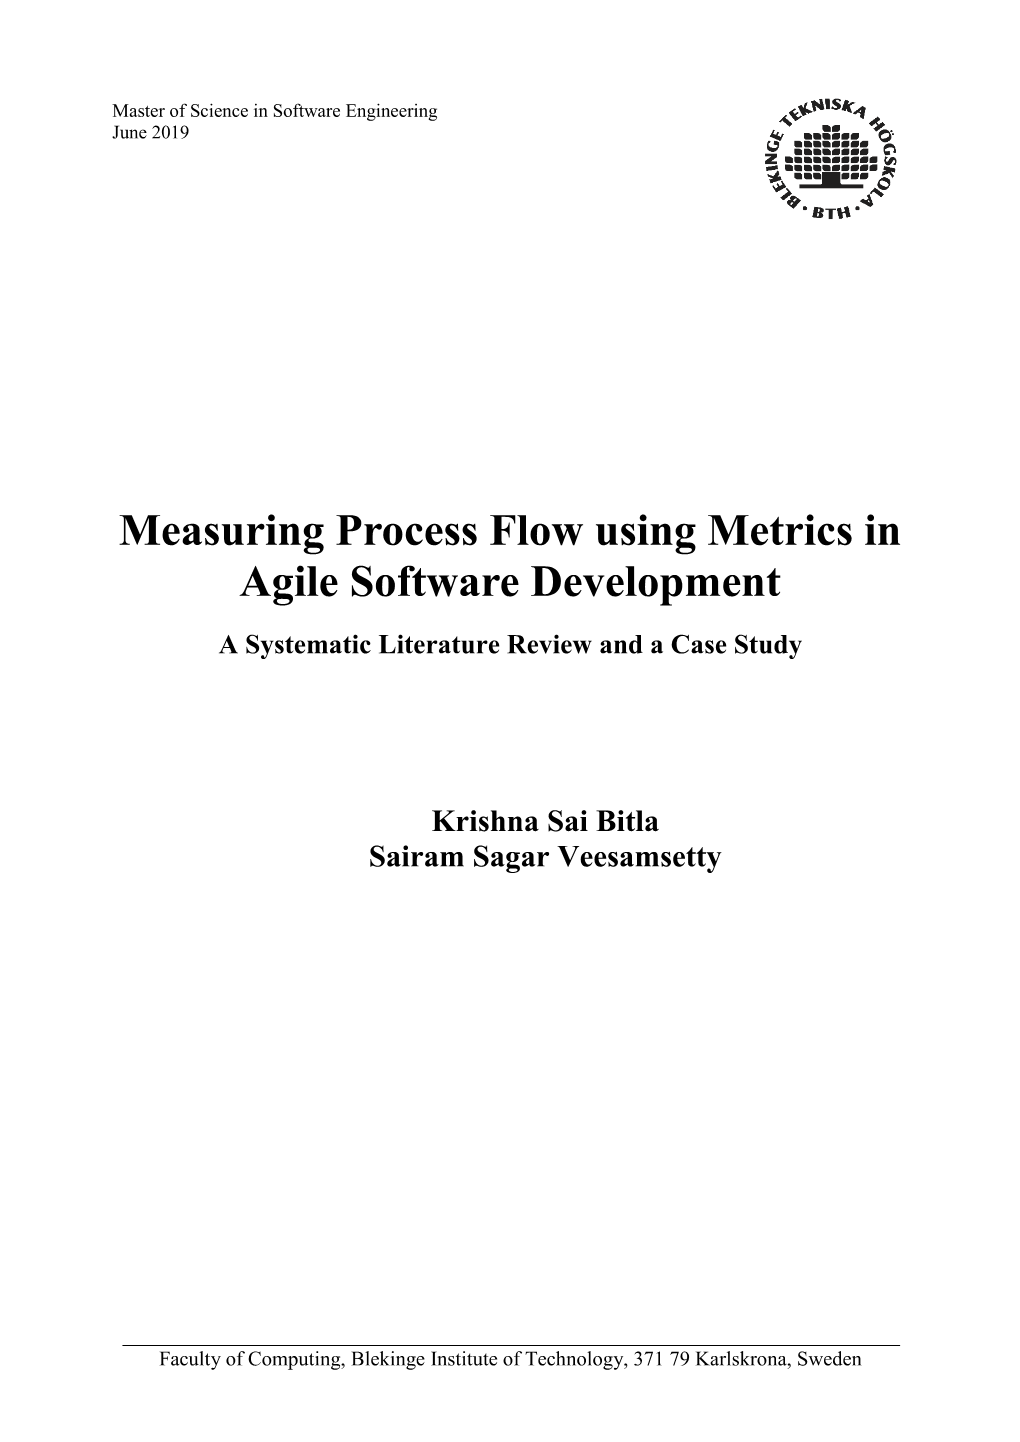 Measuring Process Flow Using Metrics in Agile Software Development a Systematic Literature Review and a Case Study